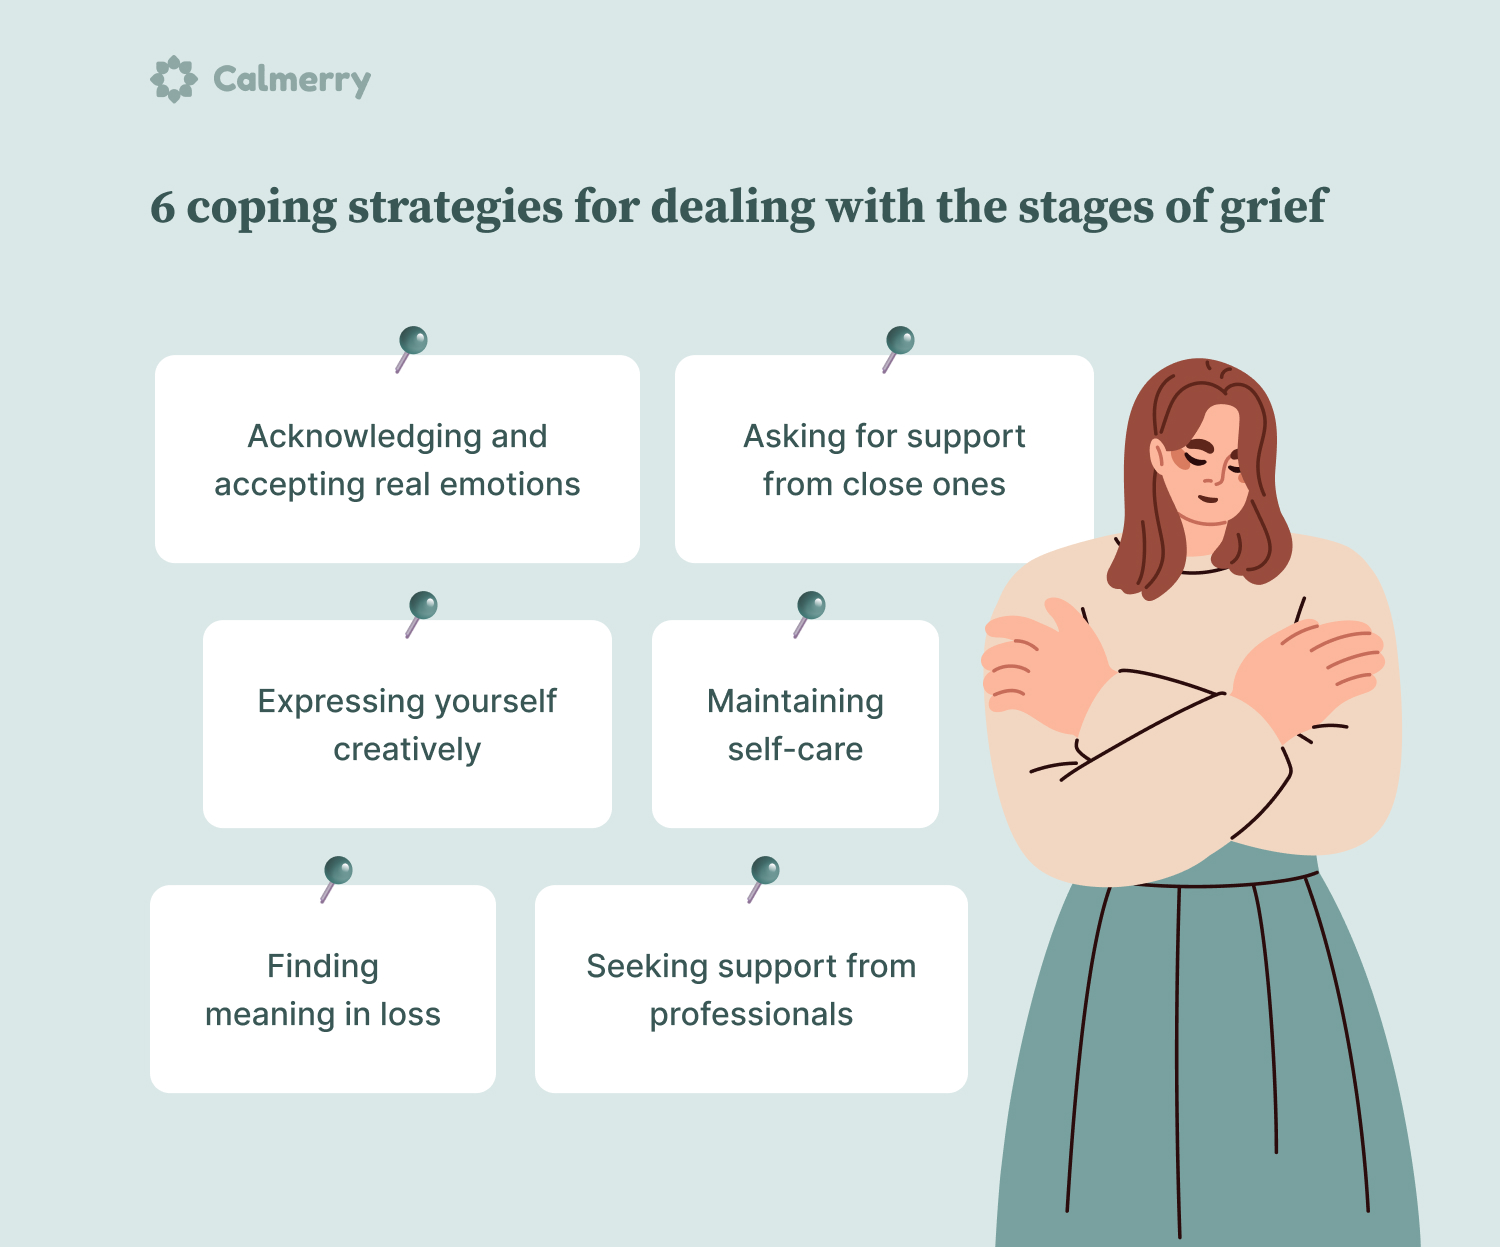 6 coping strategies for dealing with the stages of grief